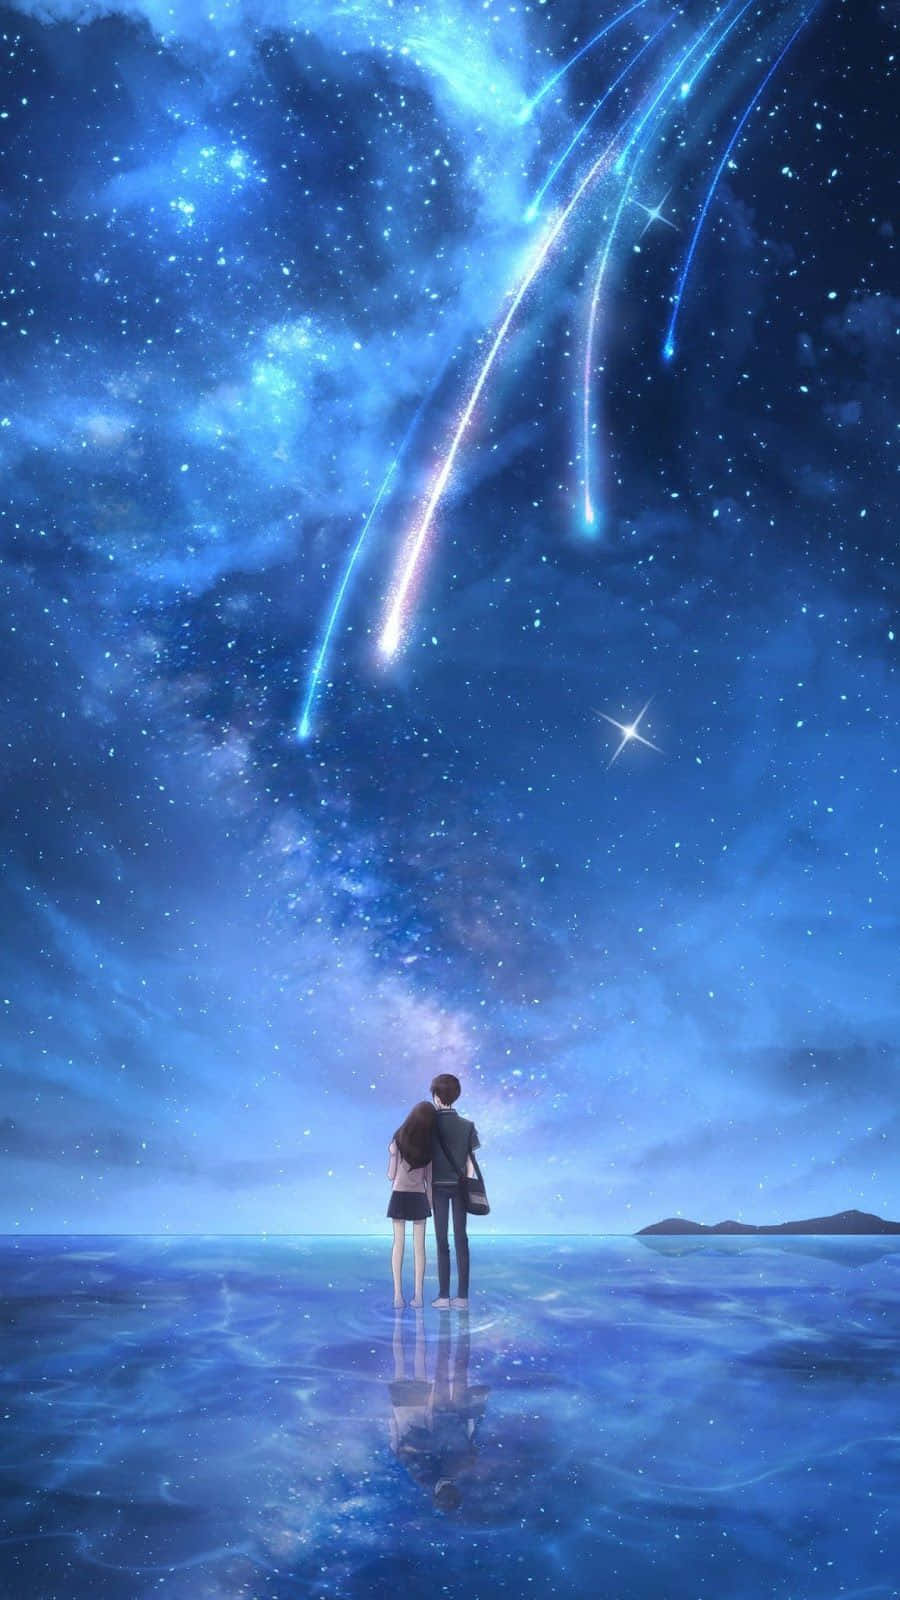 Magical Night Sky With Couple With Many Shooting Stars Wallpaper